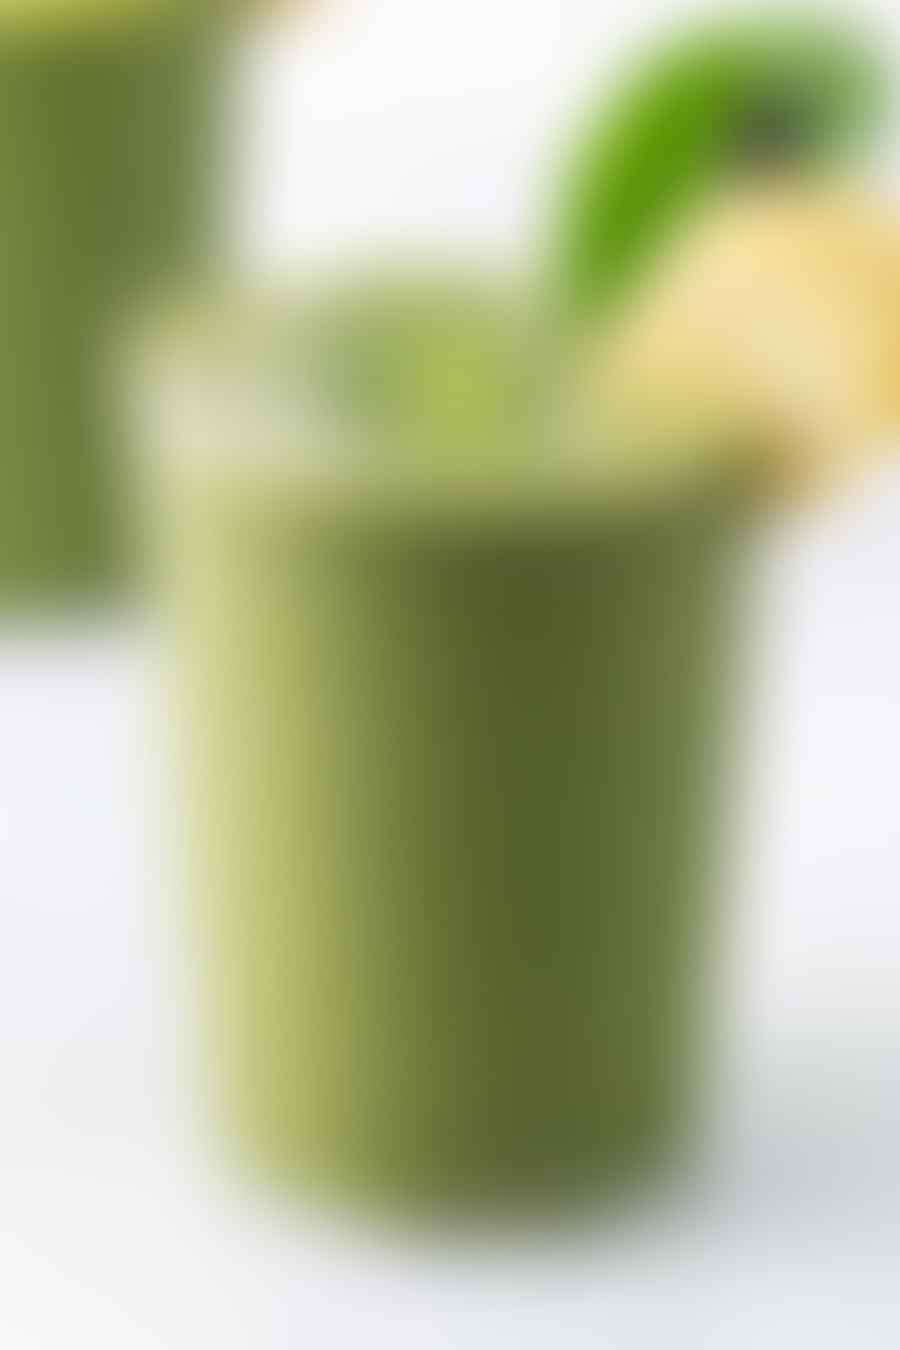 A refreshing matcha smoothie promoting relaxation